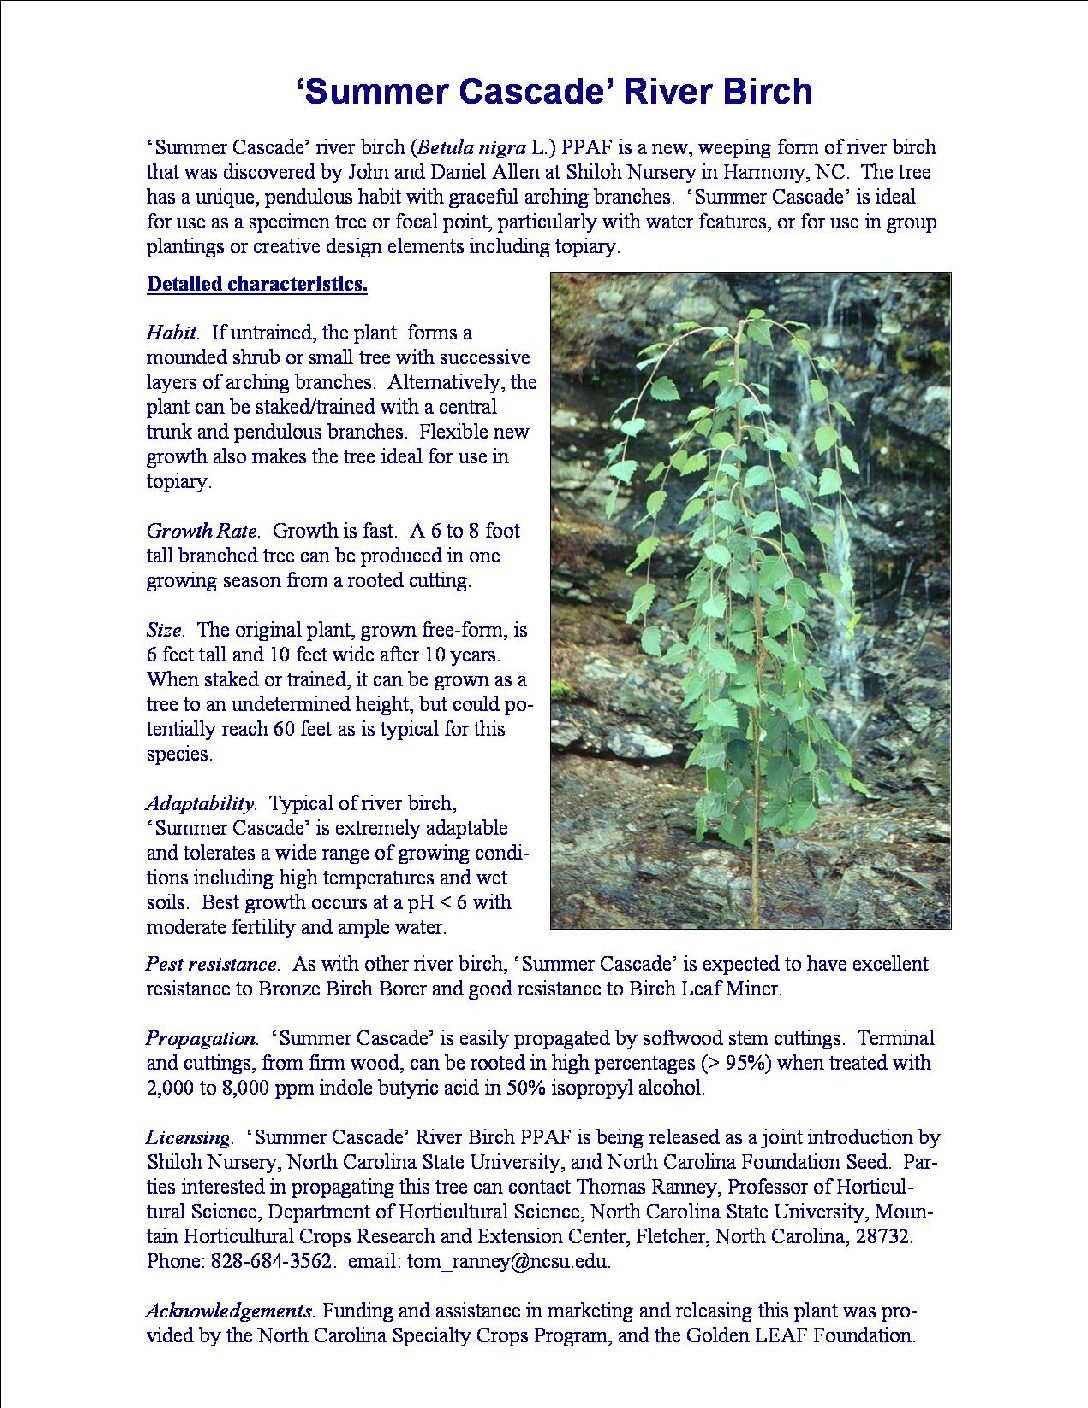 screen capture of Page 1 of flyer about 'Summer Cascade' River Birch